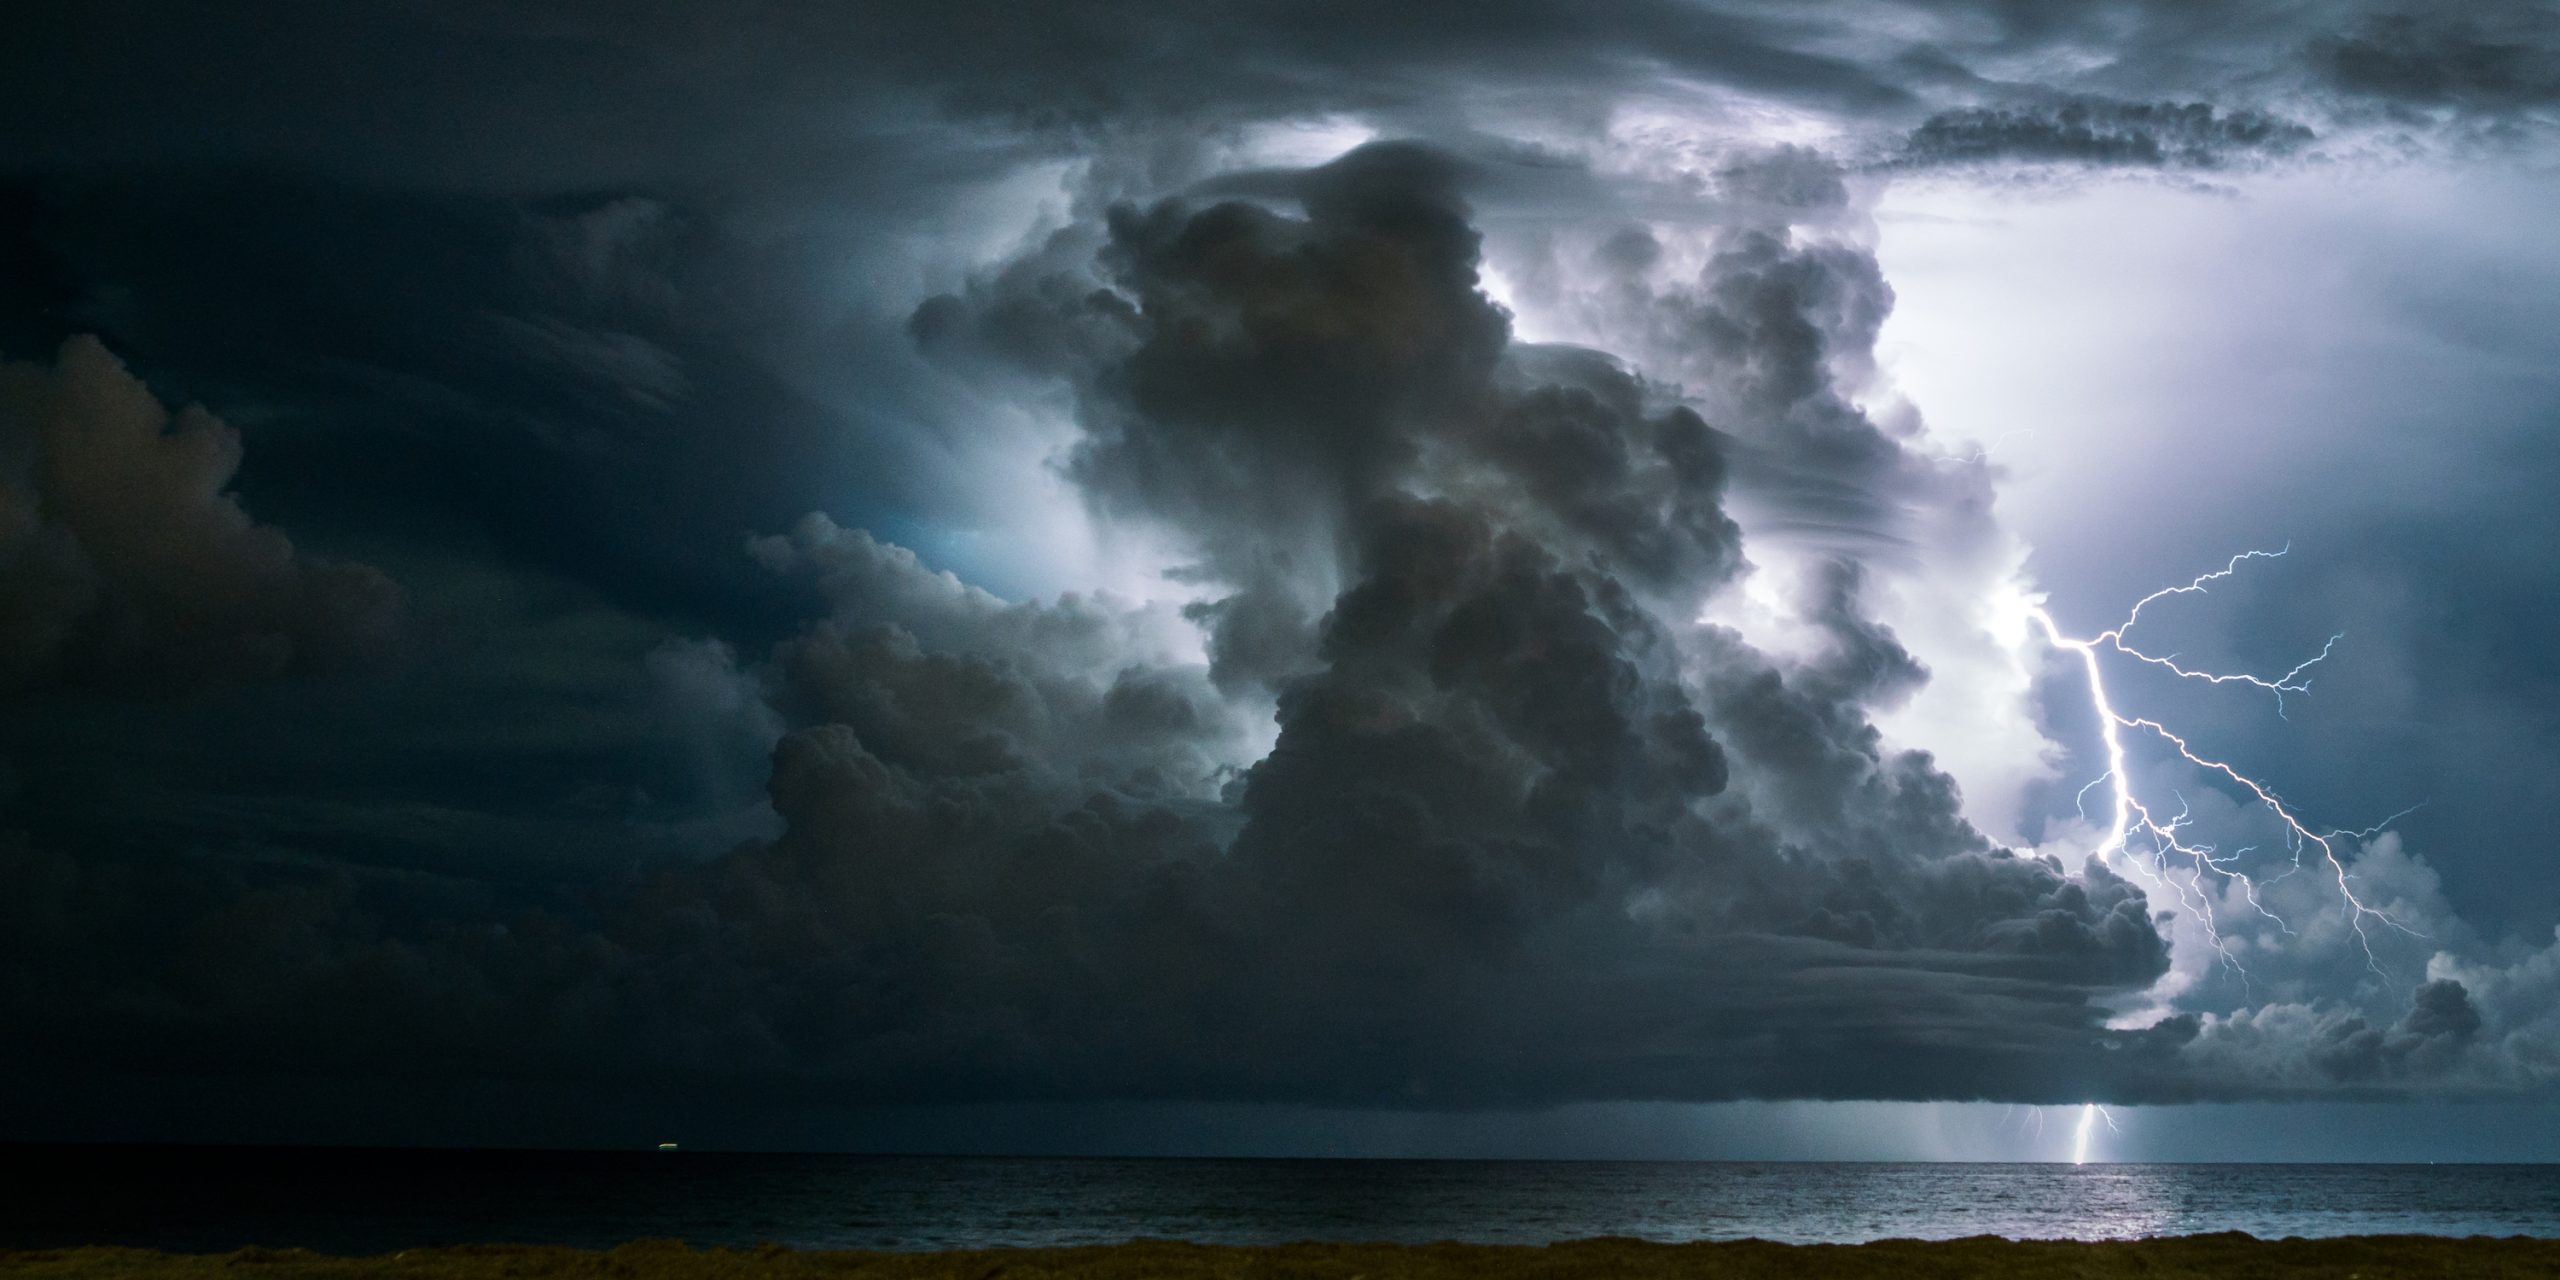 Conscious storms and the origin of life